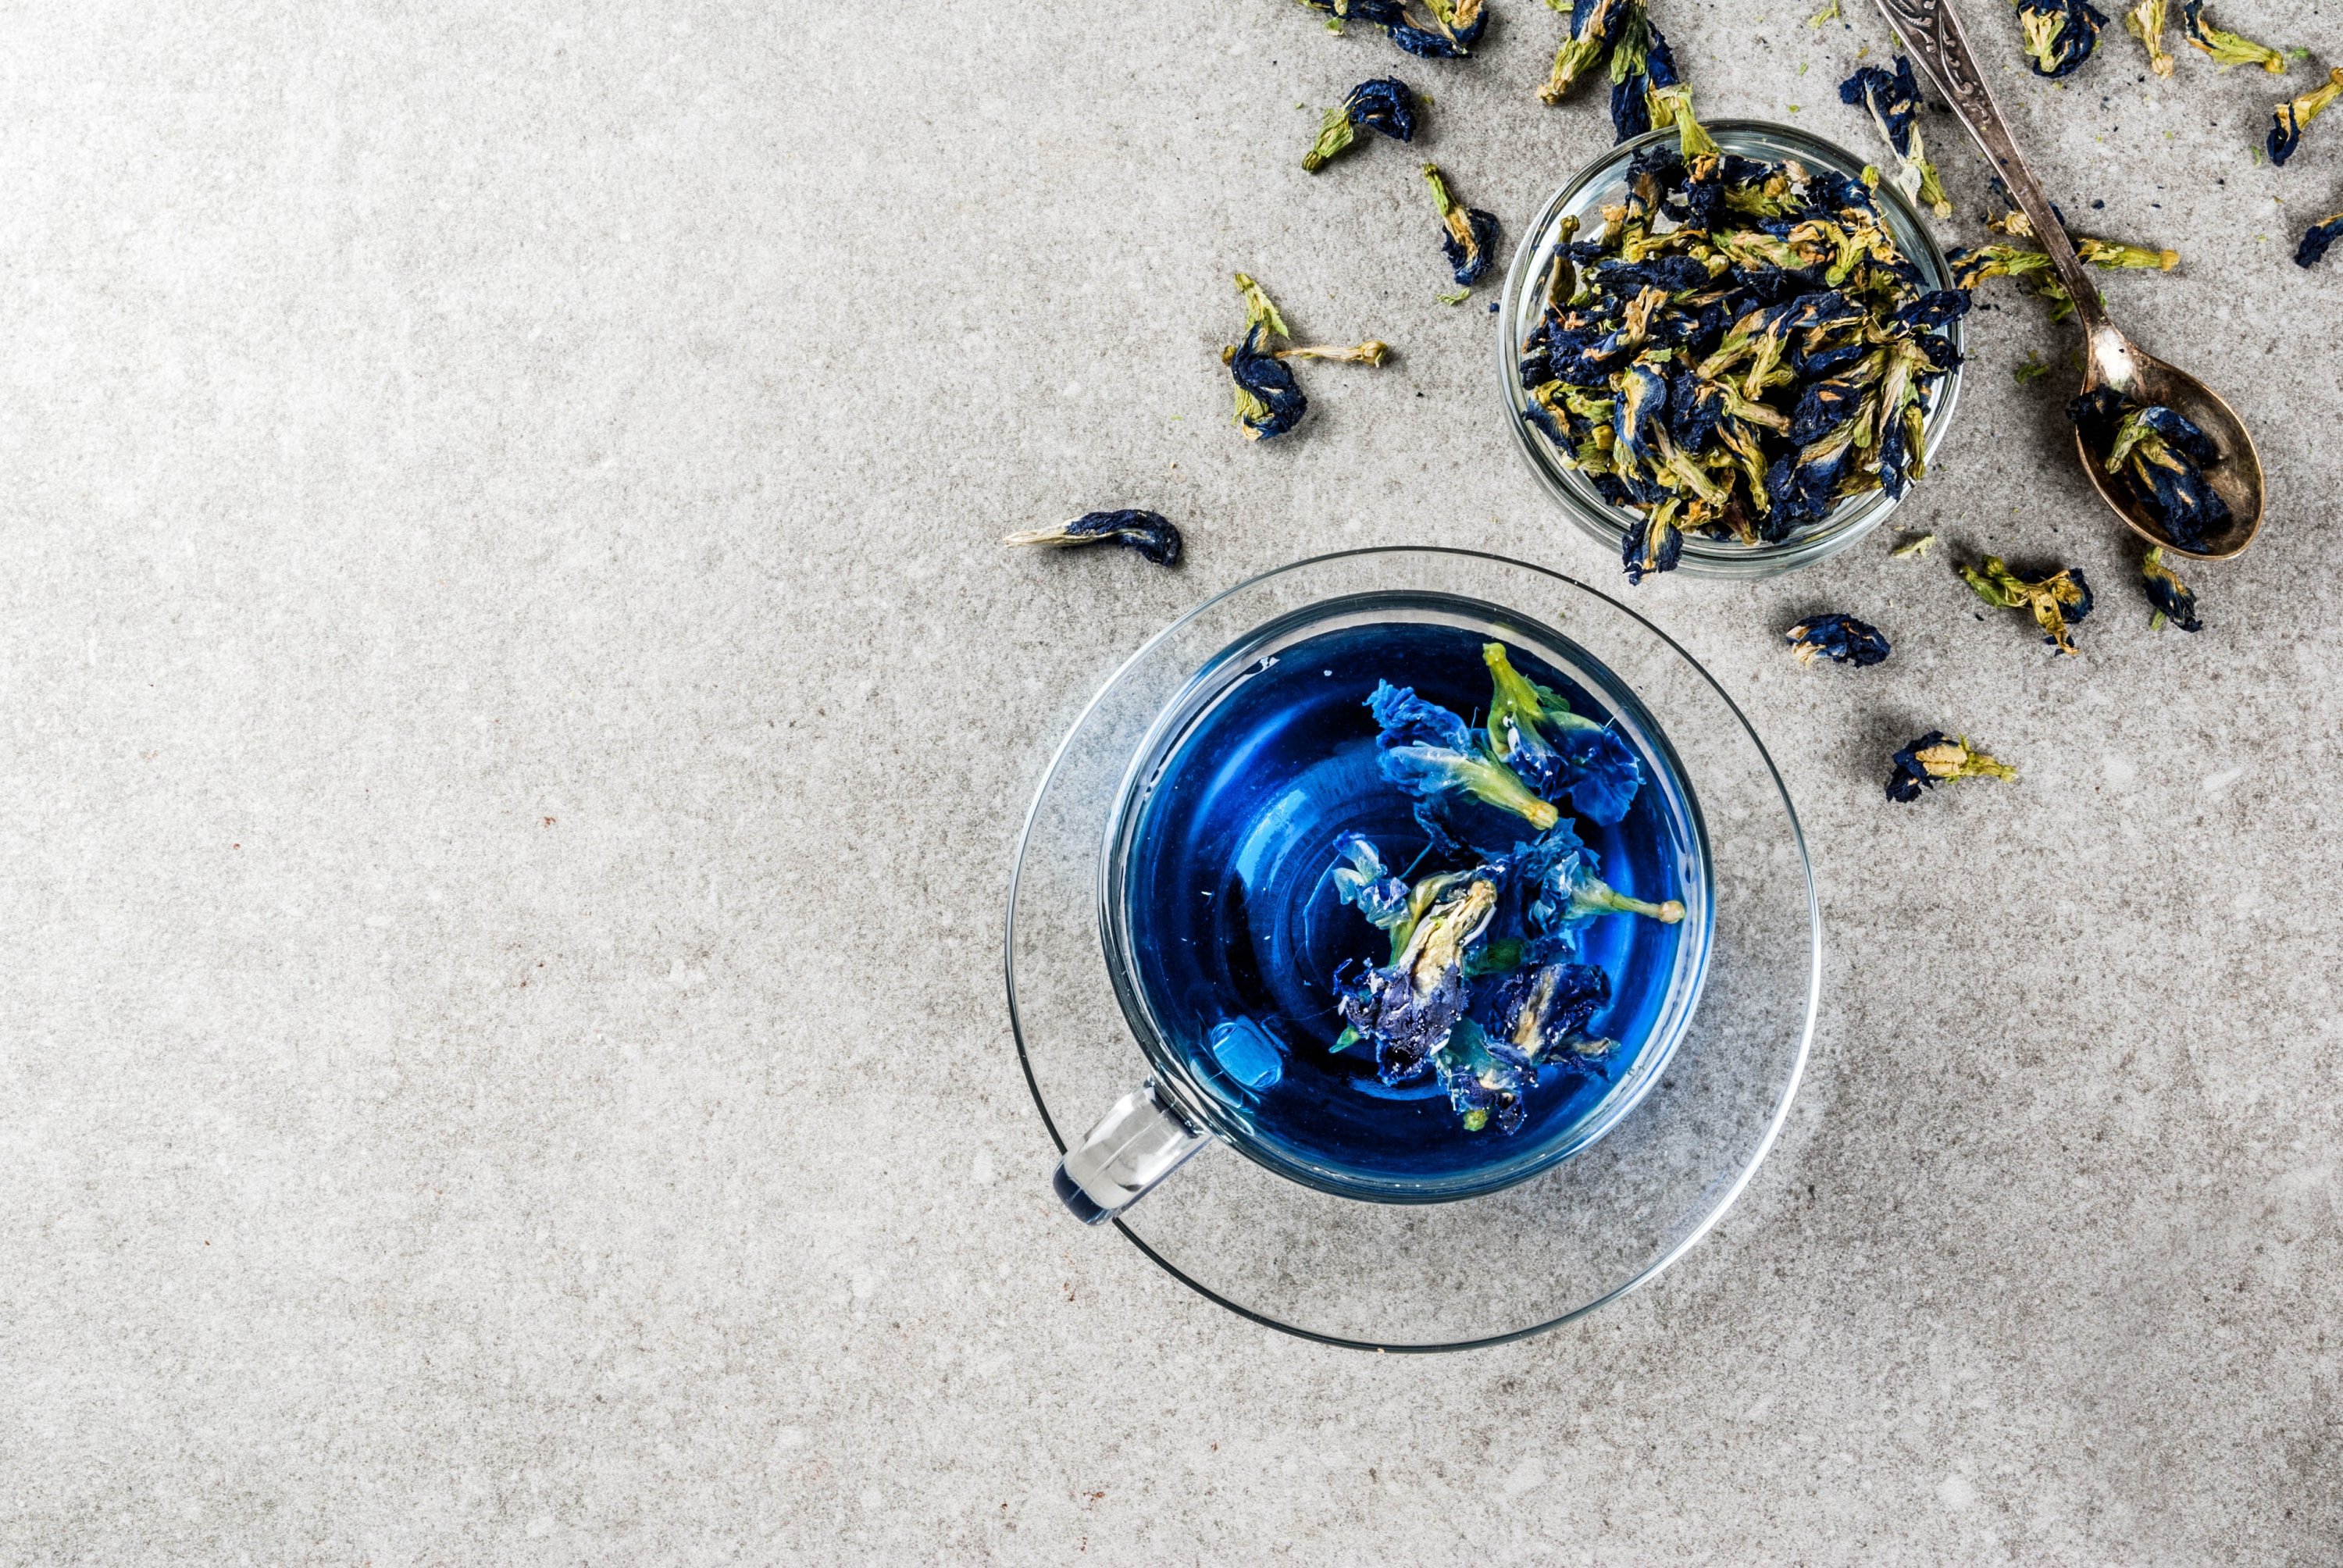 With just a few drops of lemon, butterfly pea flower tea turns a shade of purple. (Shutterstock Photo)